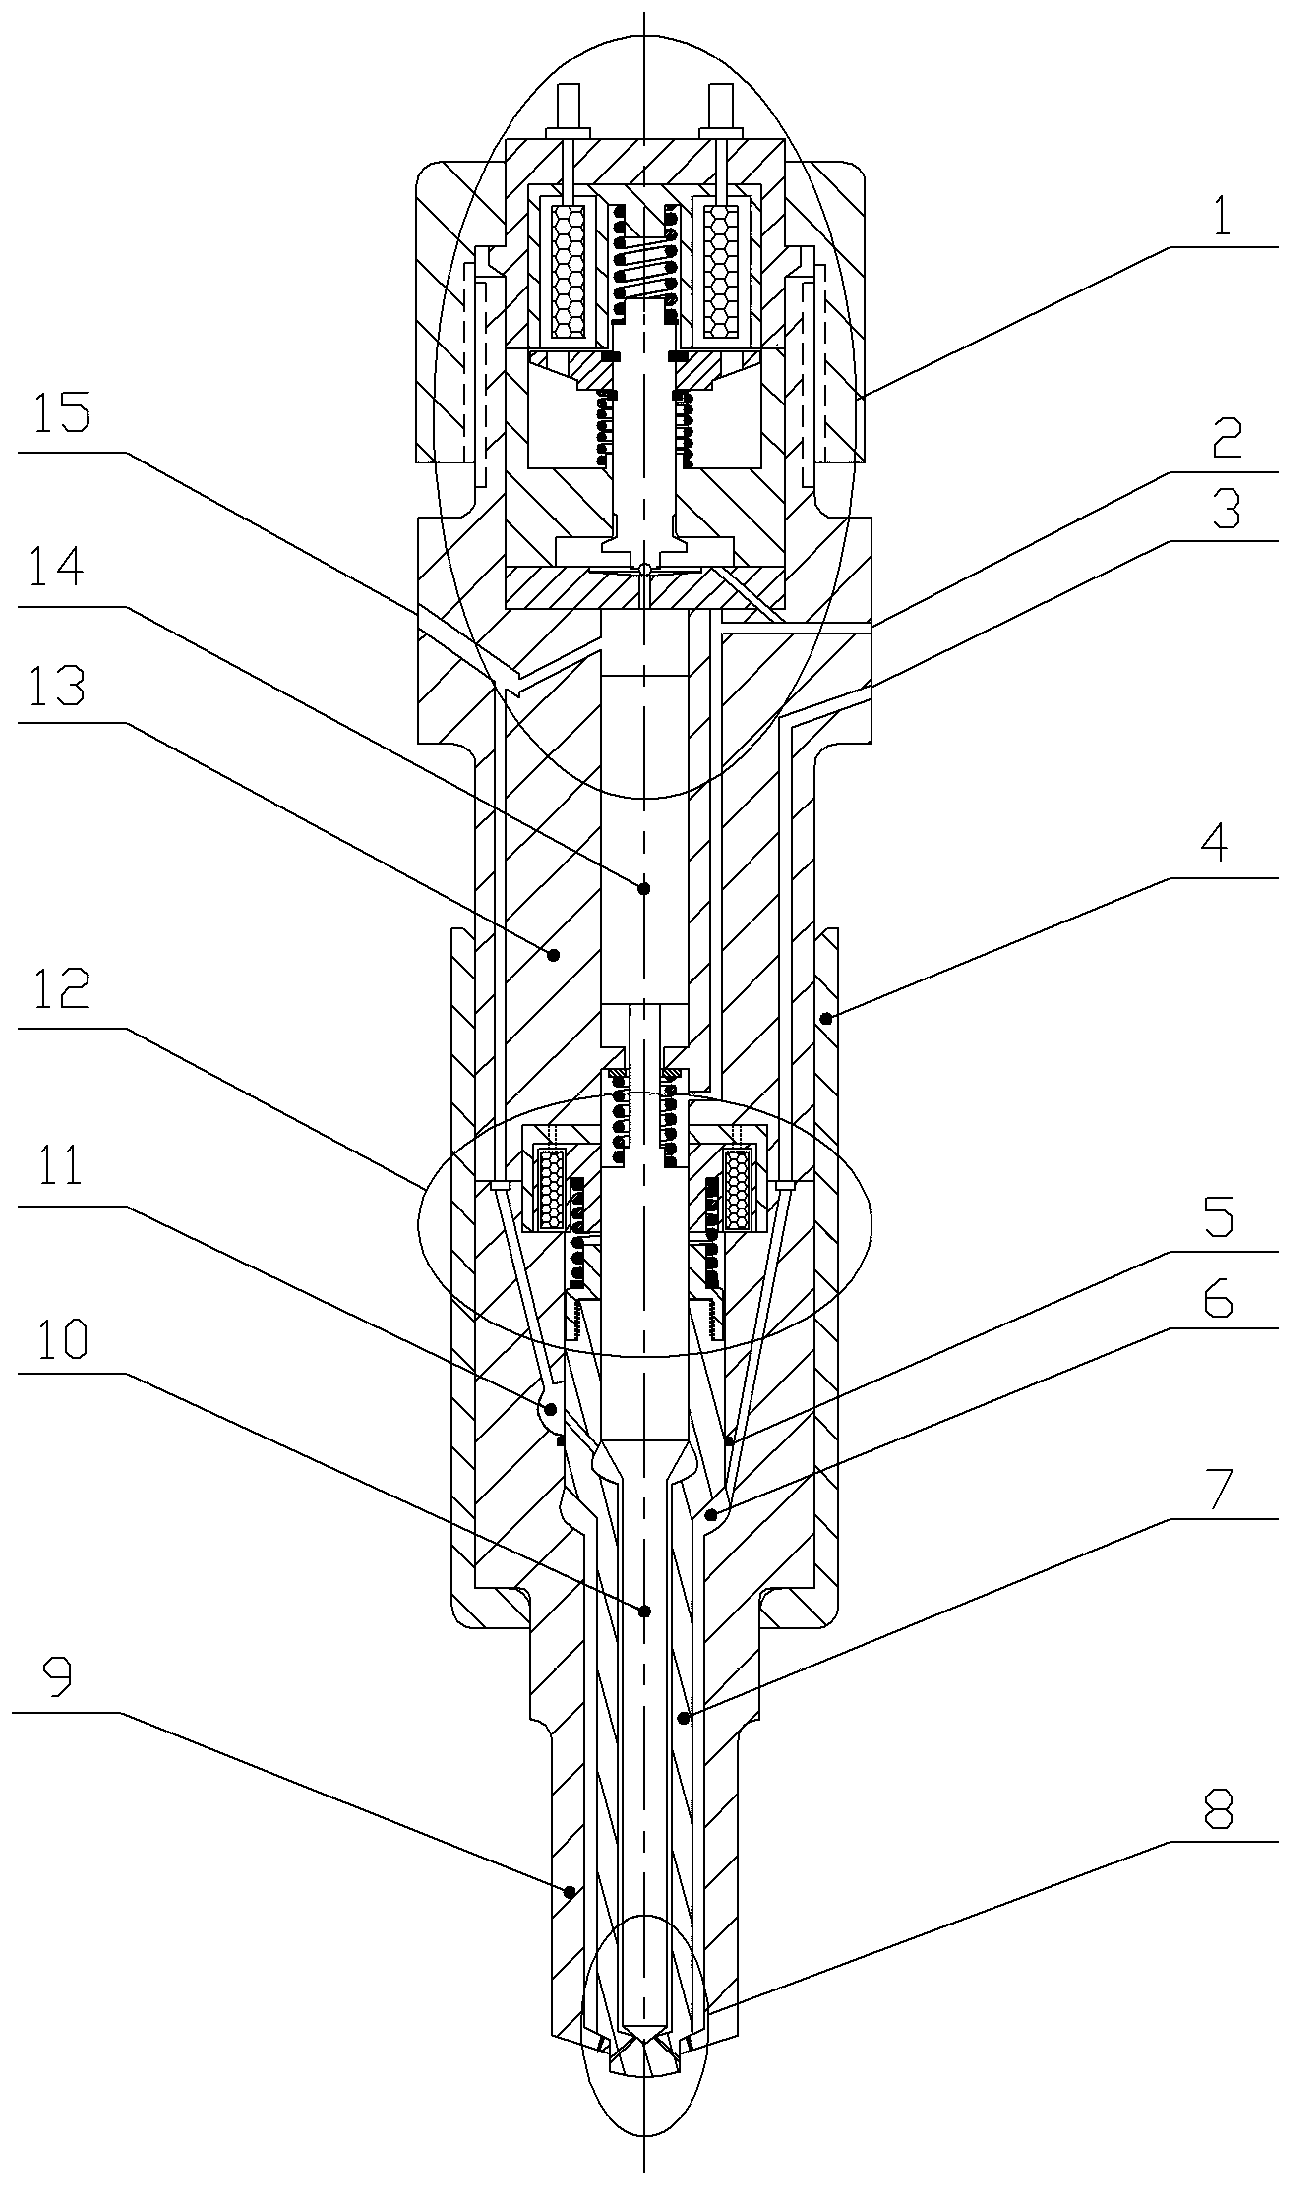 Dual-fuel electric control monomer ejector